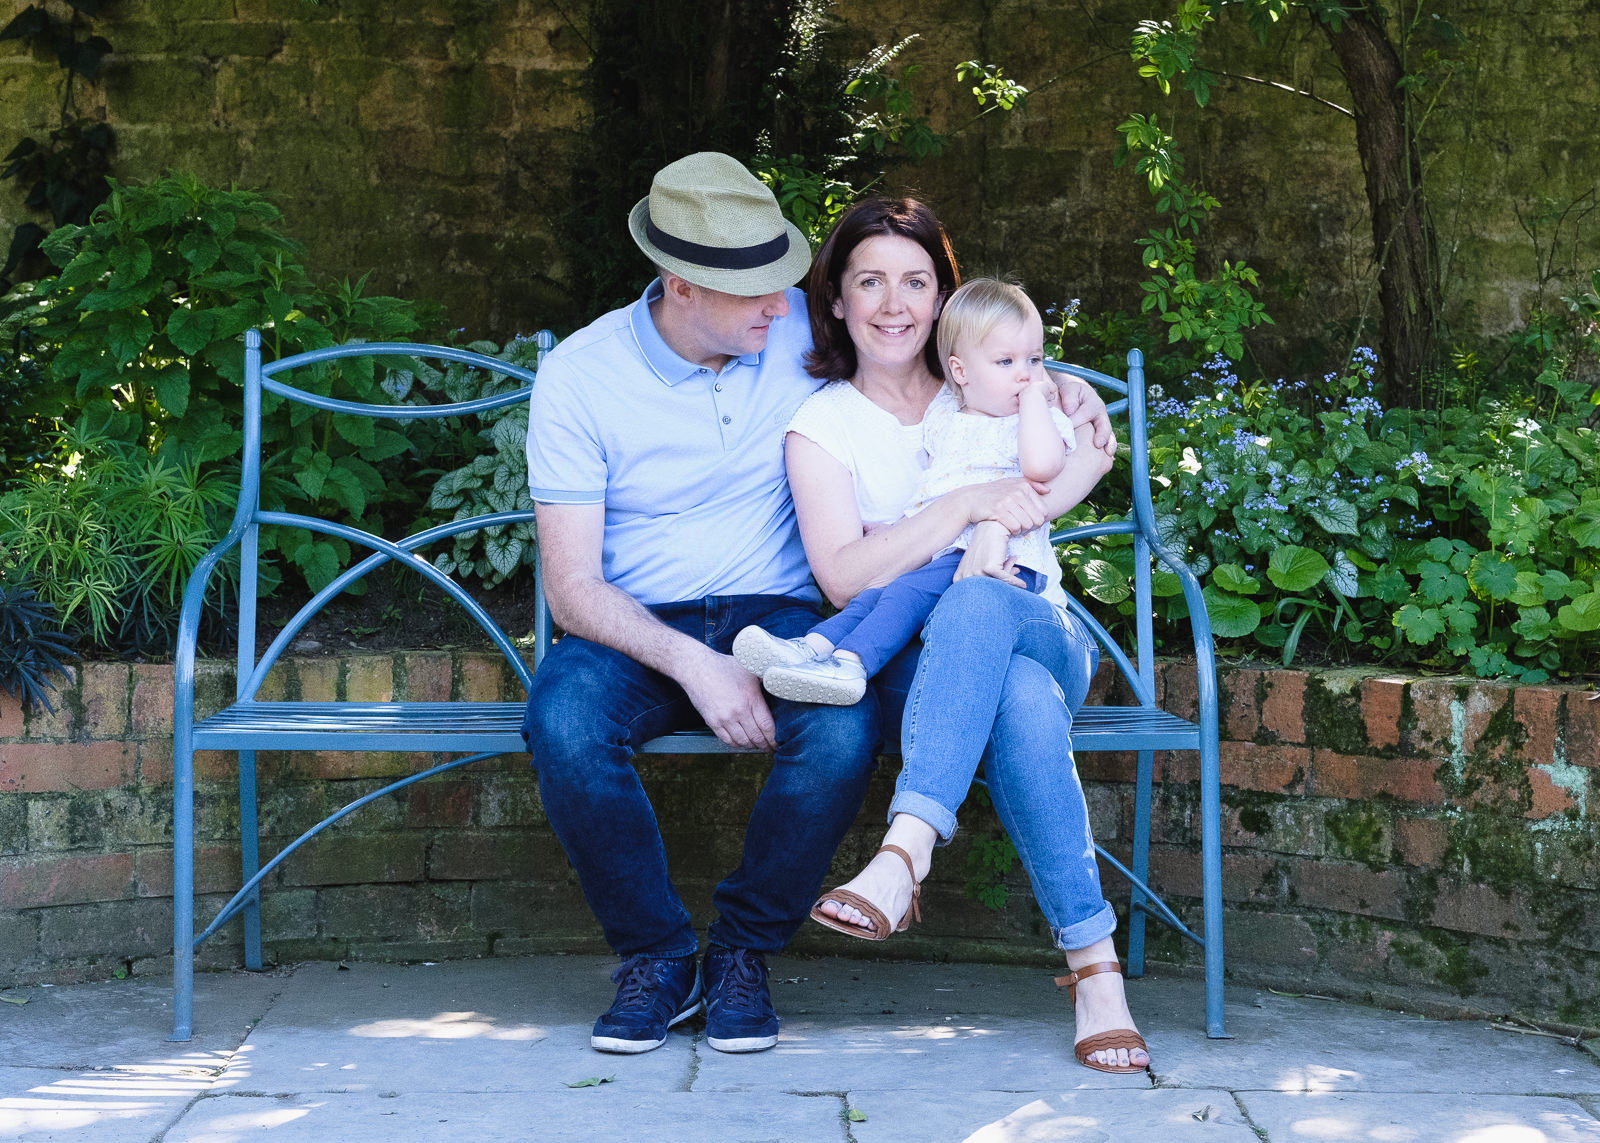 Family photography - enjoying a peaceful moment in country house gardens